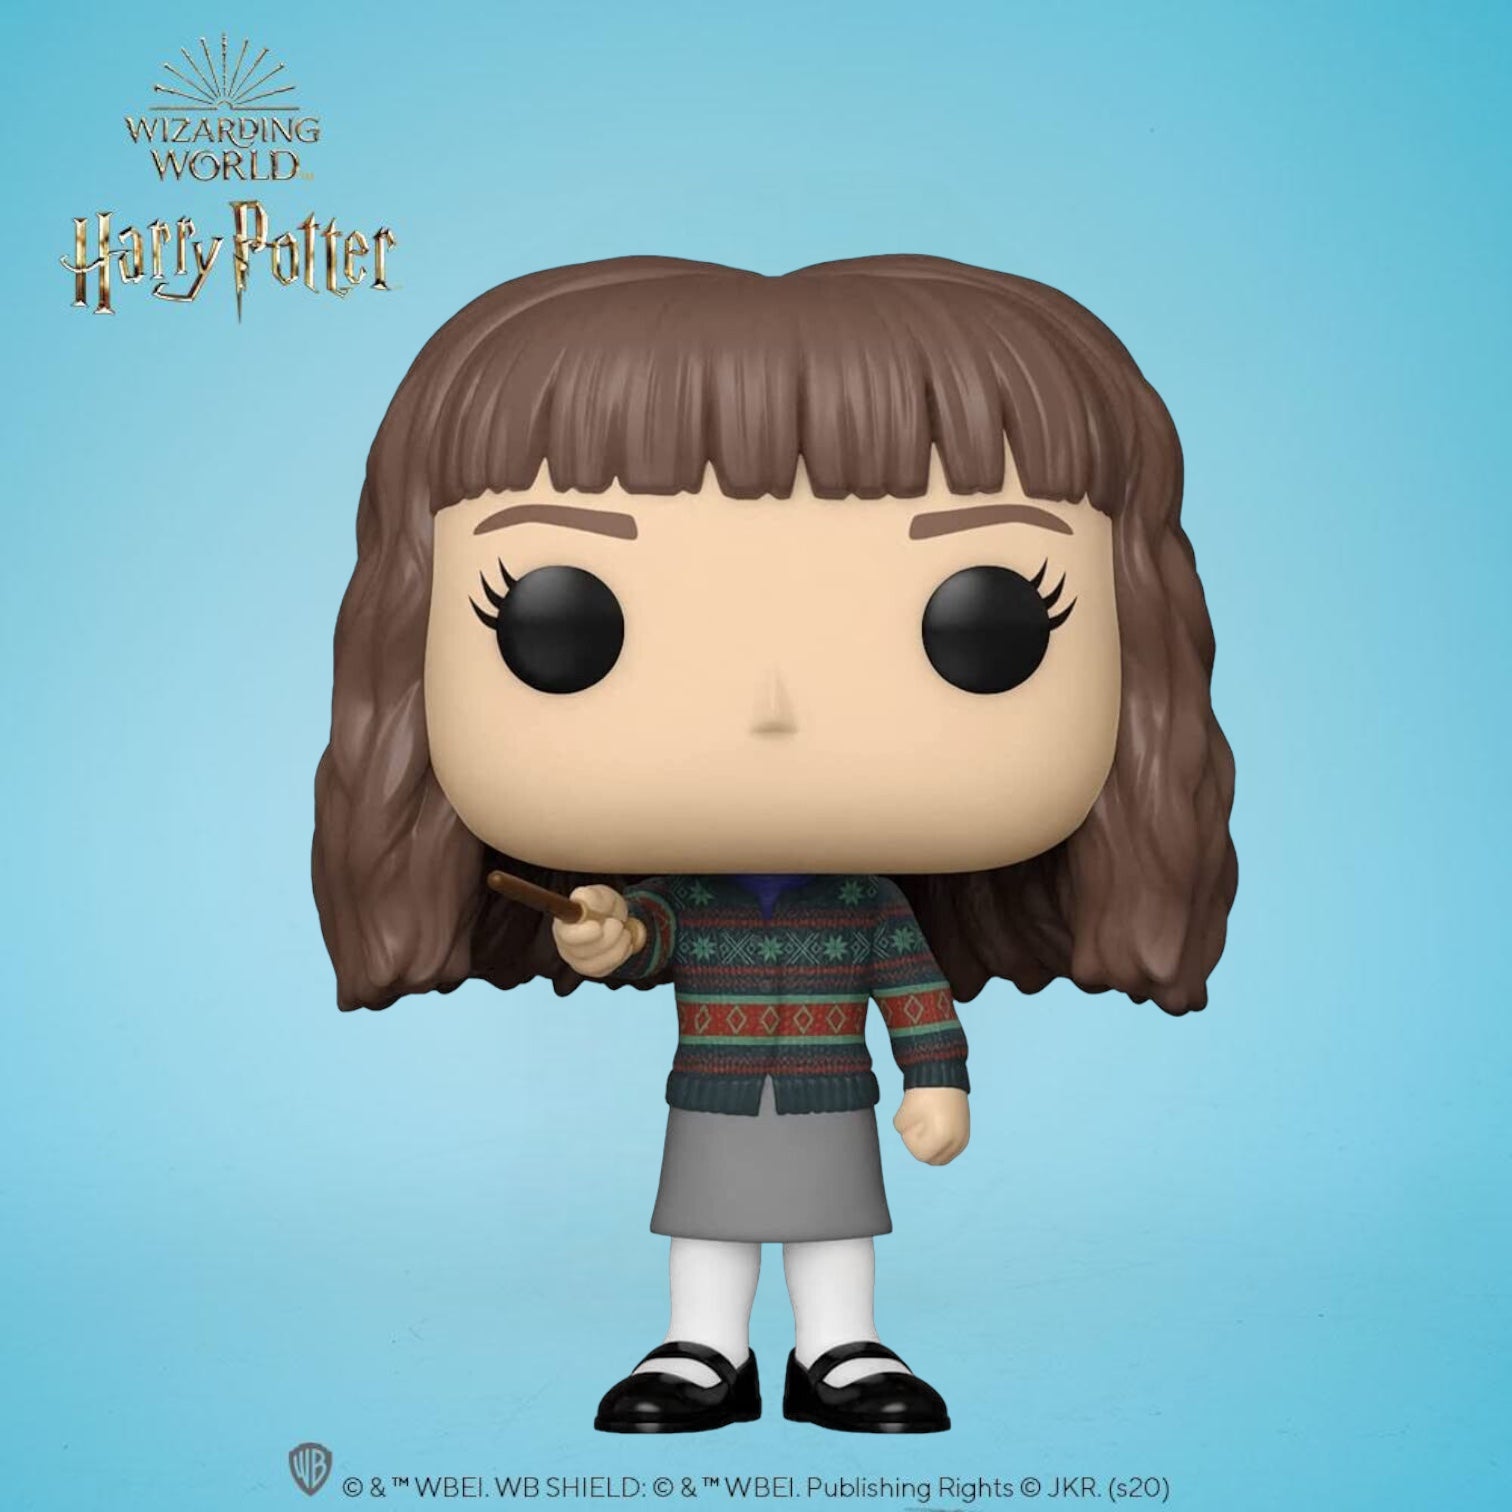 Funko Pop! Harry Potter - Hermione Granger with Wand #133 – Lonestar Finds